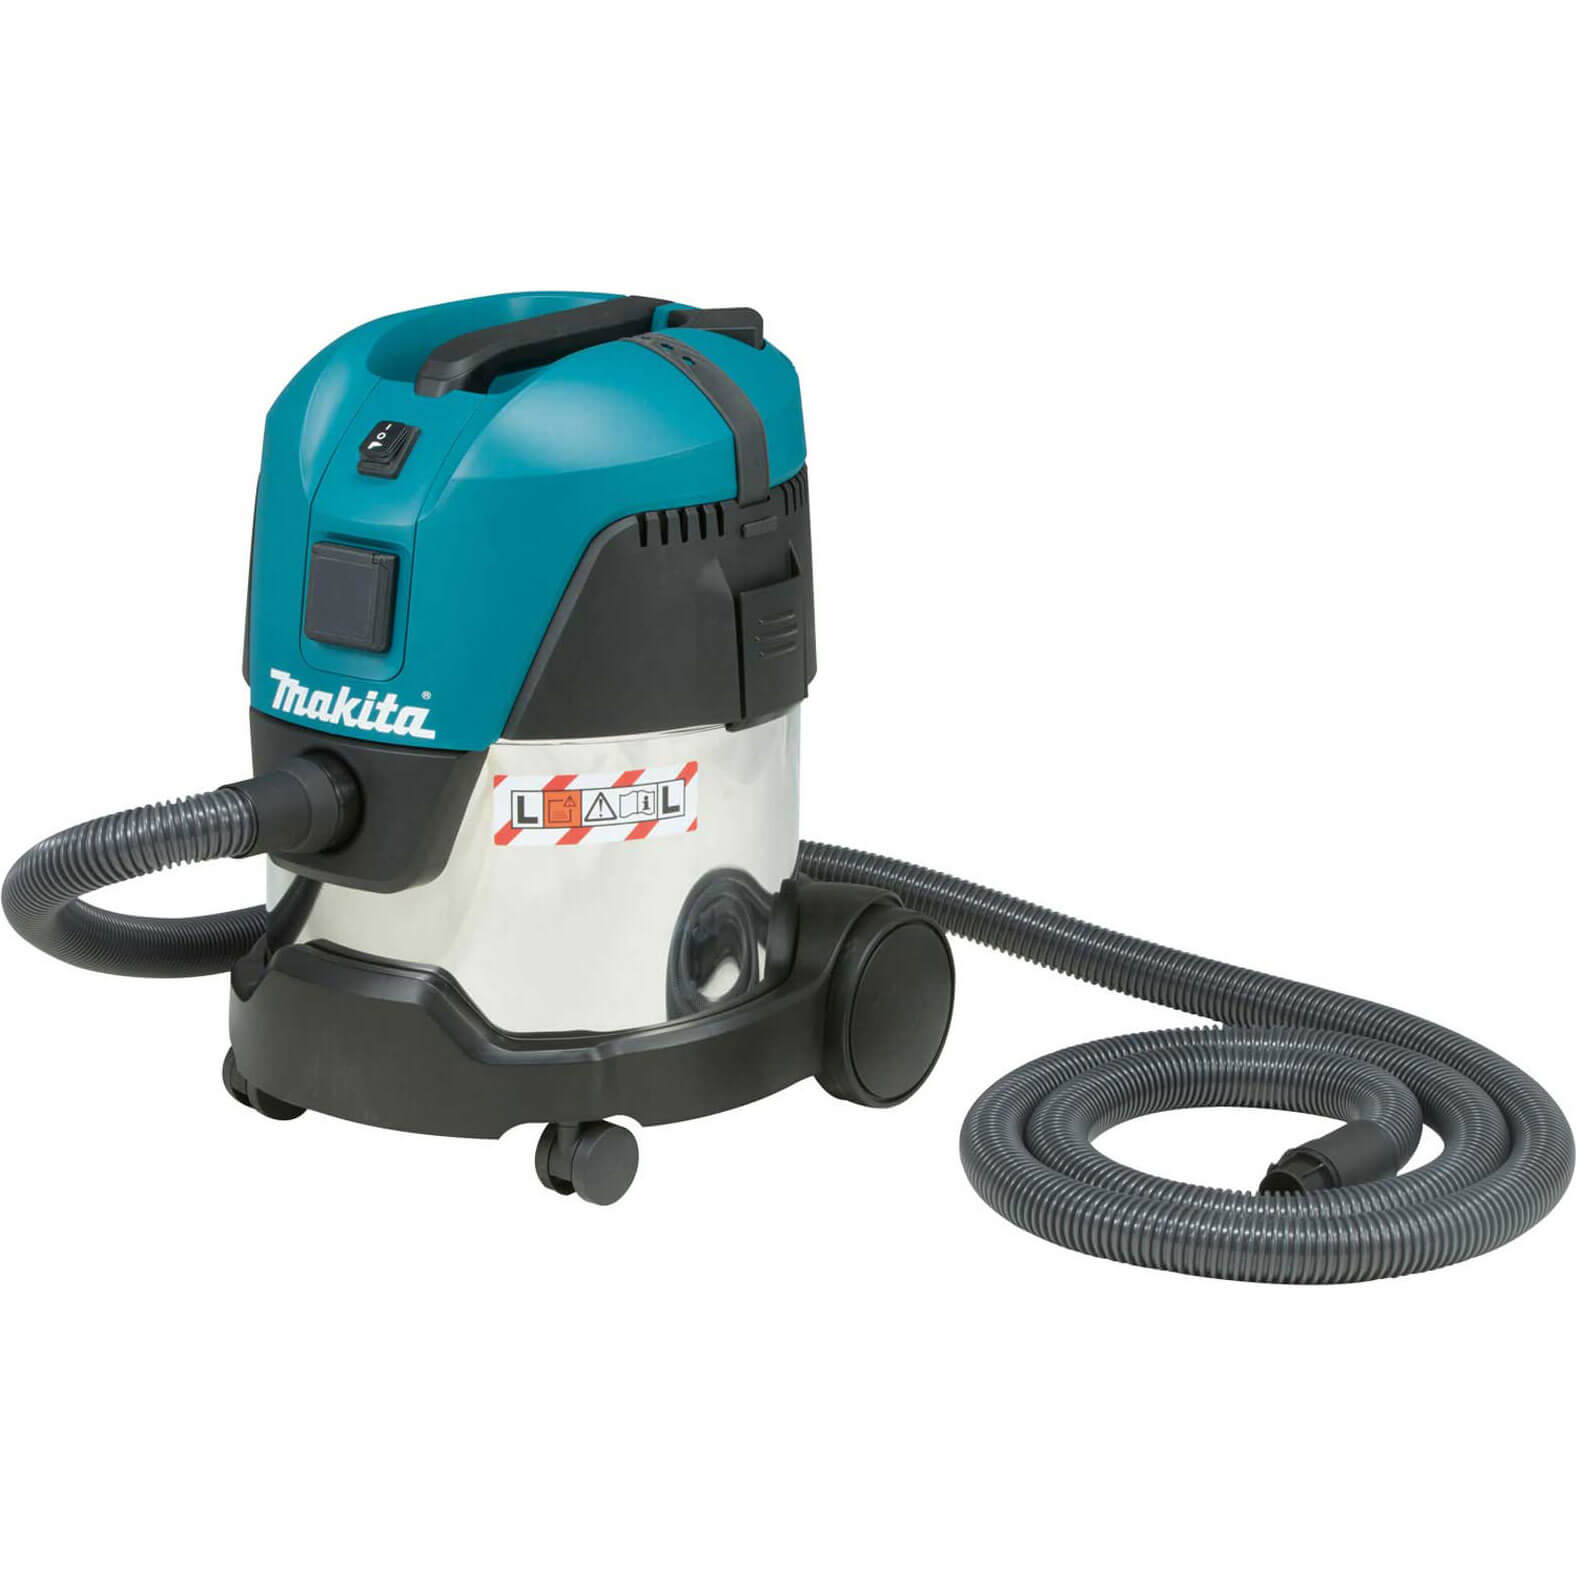 Image of Makita VC2012L L Class Dust Extractor 110v